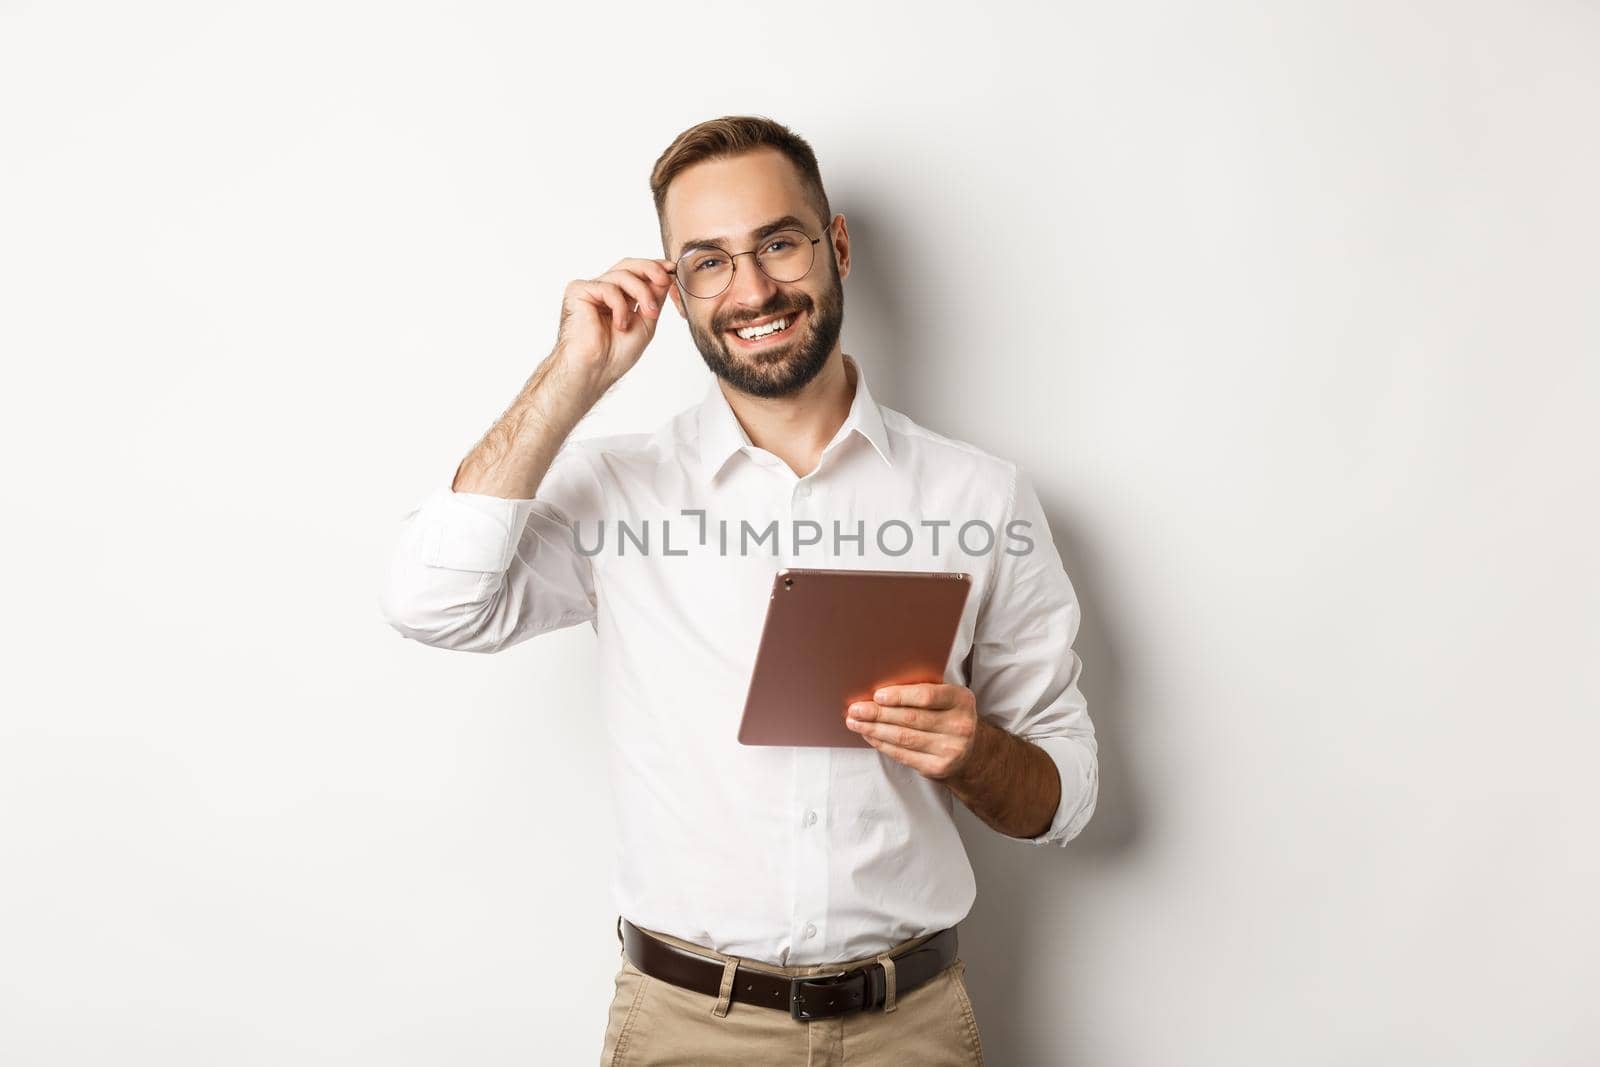 Confident business man working on digital tablet, smiling happy, standing over white background.